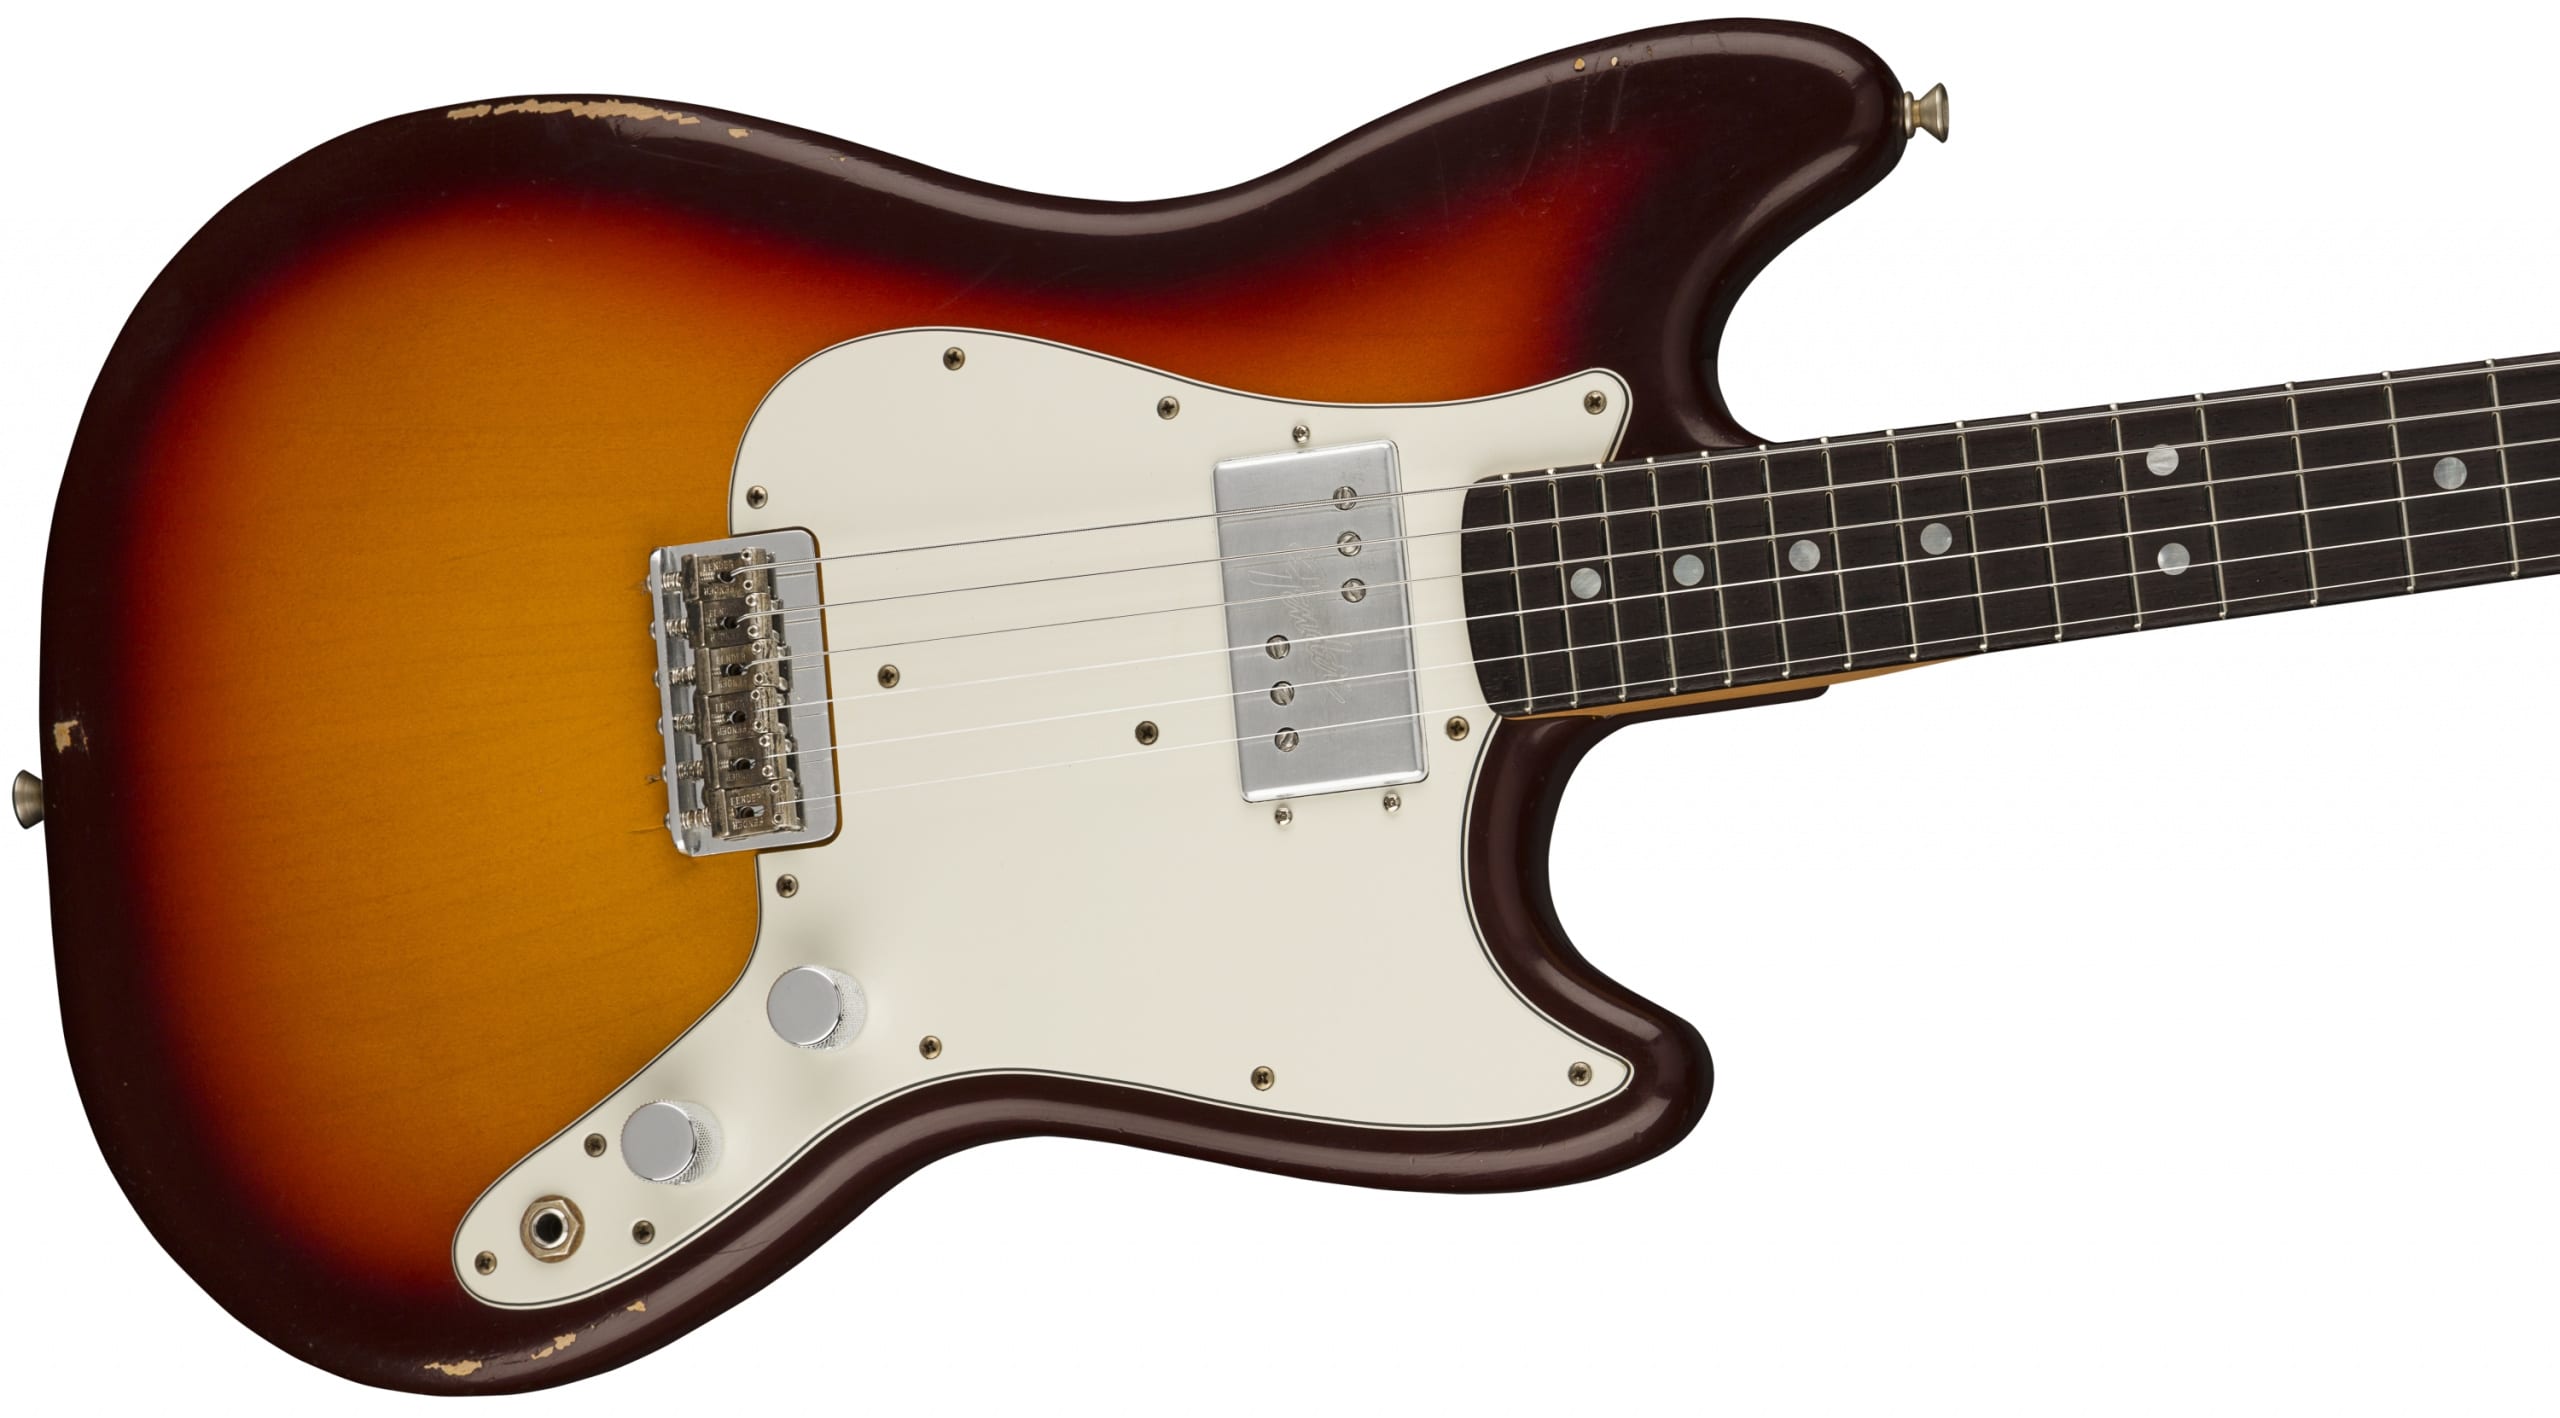 Fender Play Foundation Musicmaster with Wide Range Neck Humbucker by Paul Waller